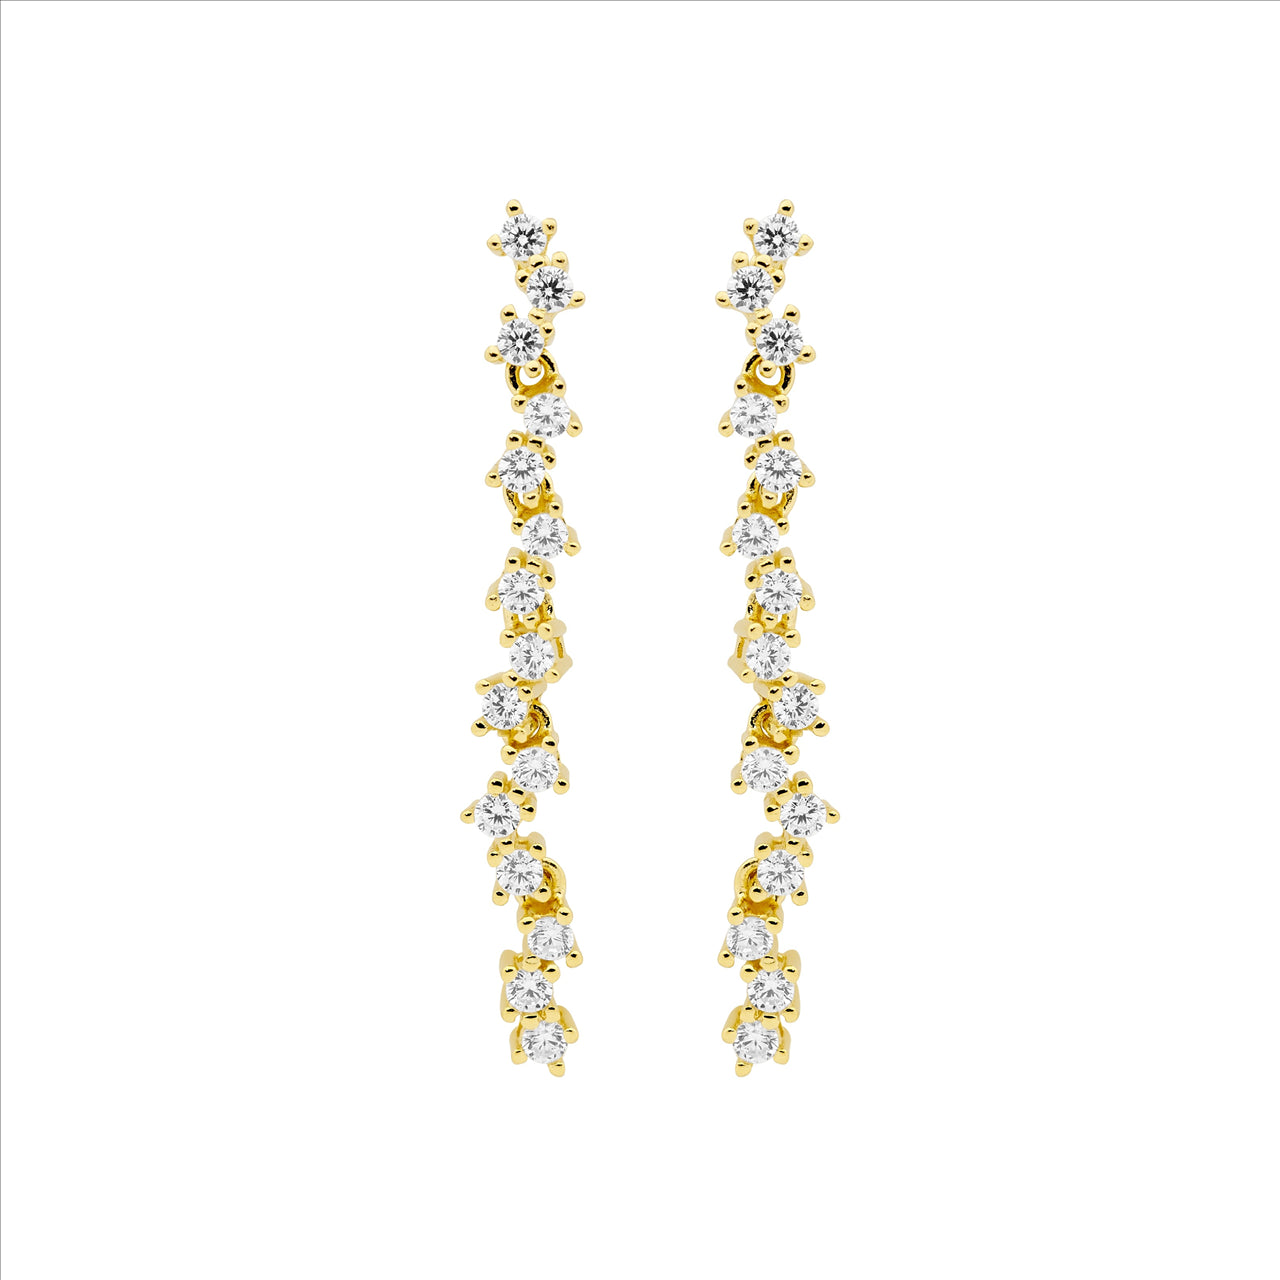 Ellani Sterling Silver Yellow Gold Plated White Cubic Zirconia Drop Stud Earrings